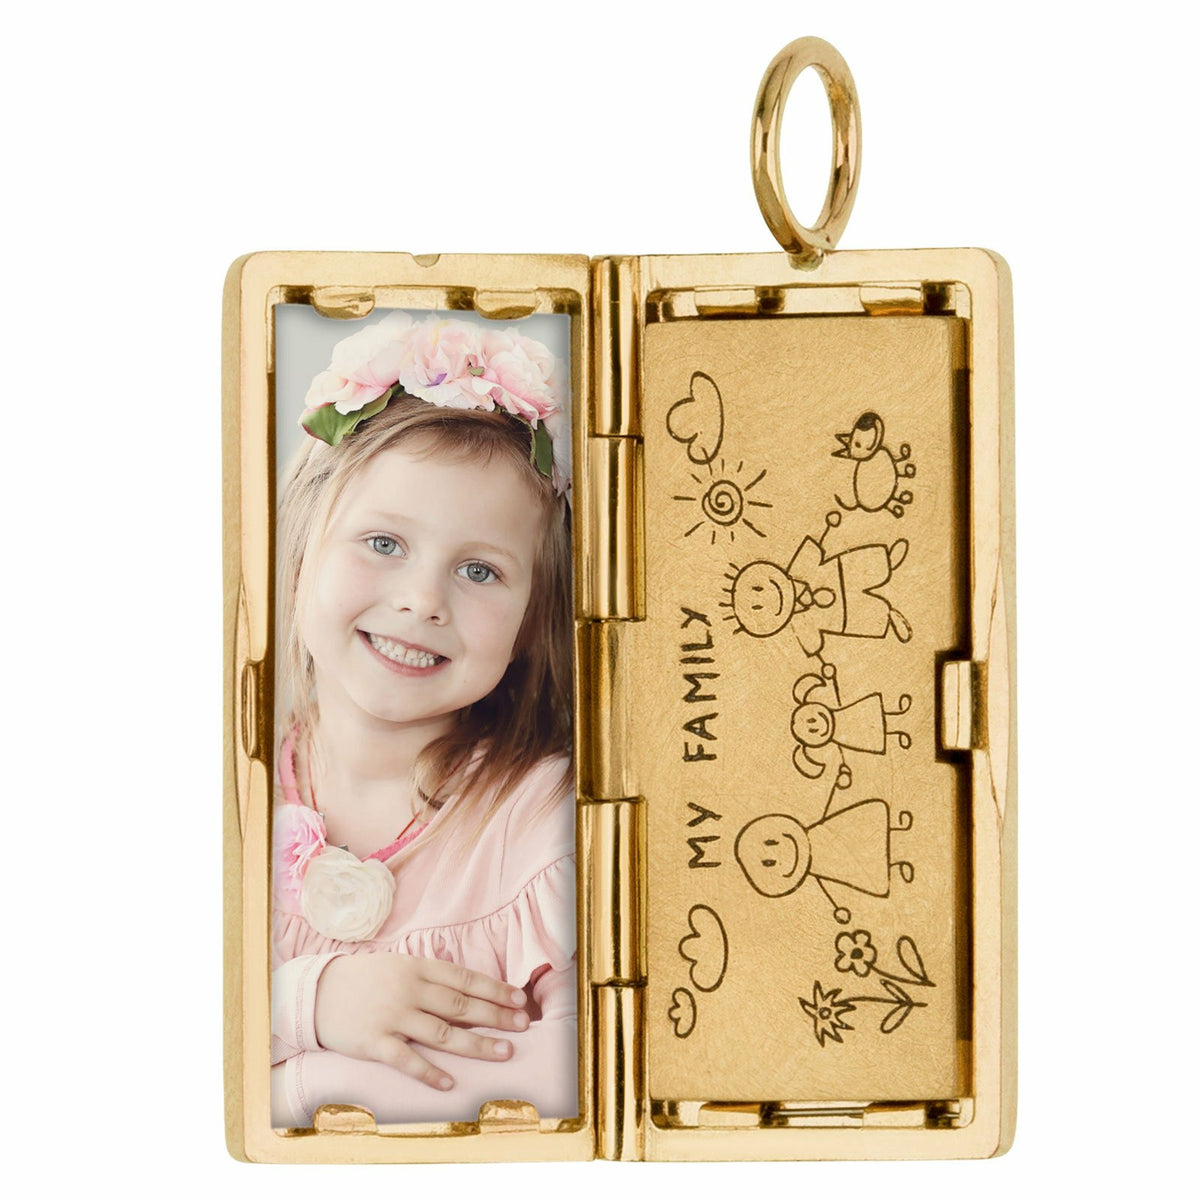 Gold Rectangular Locket with Diamonds and a Personalized Page